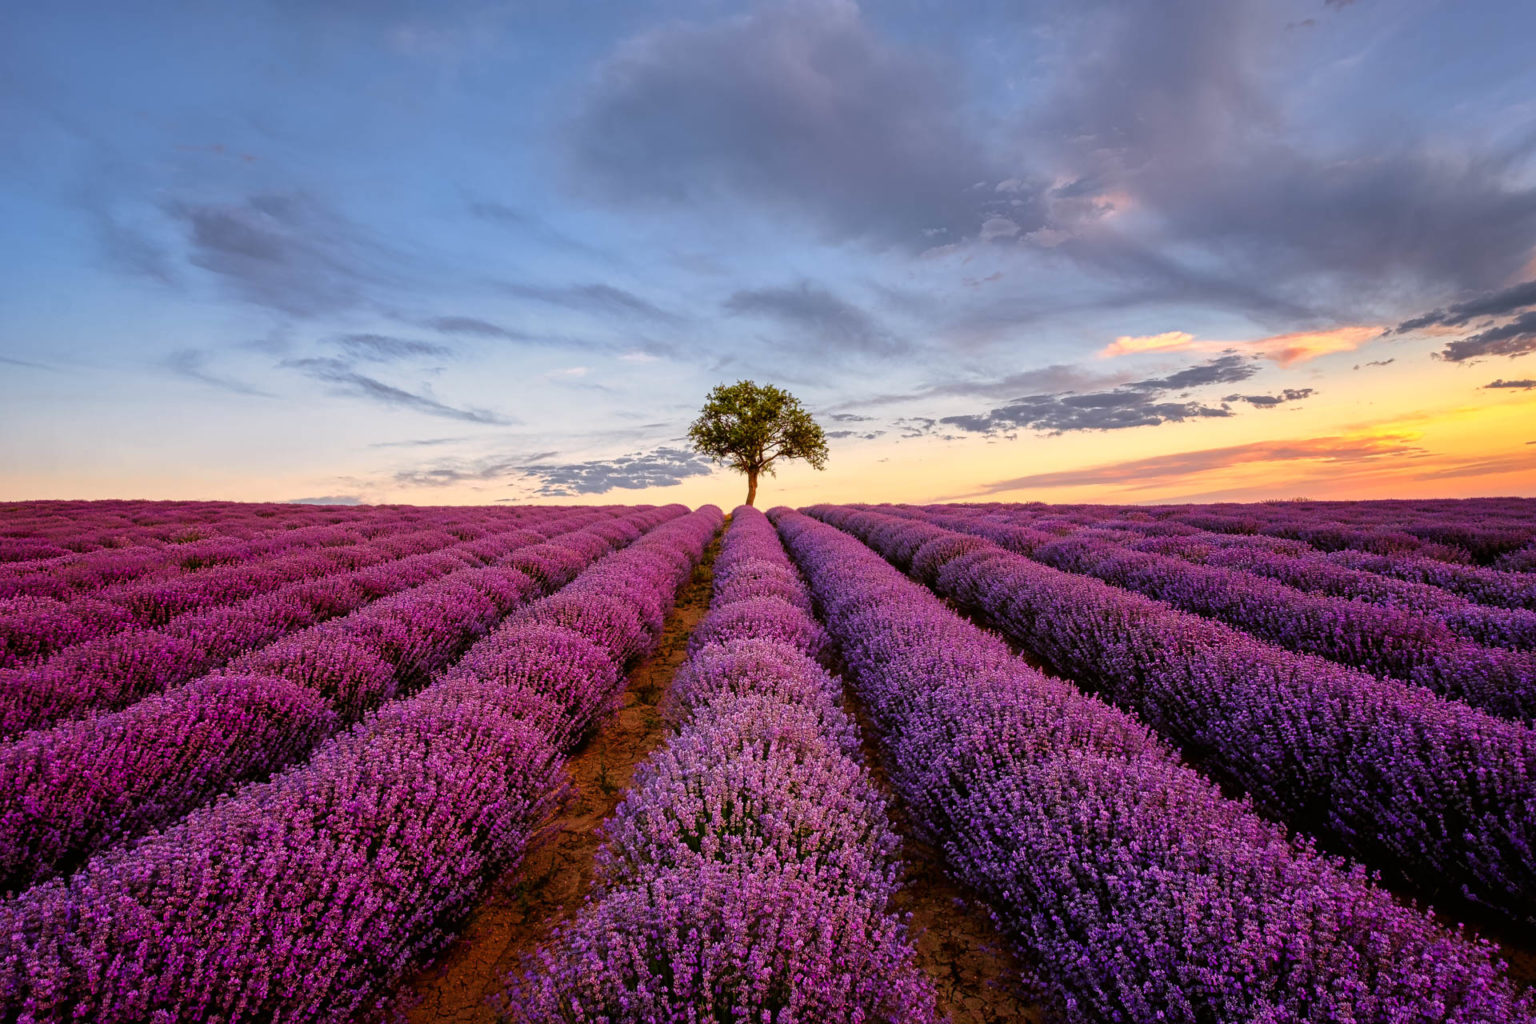 A Lonely Tree in a Lavender Field - Alexios Ntounas Photography